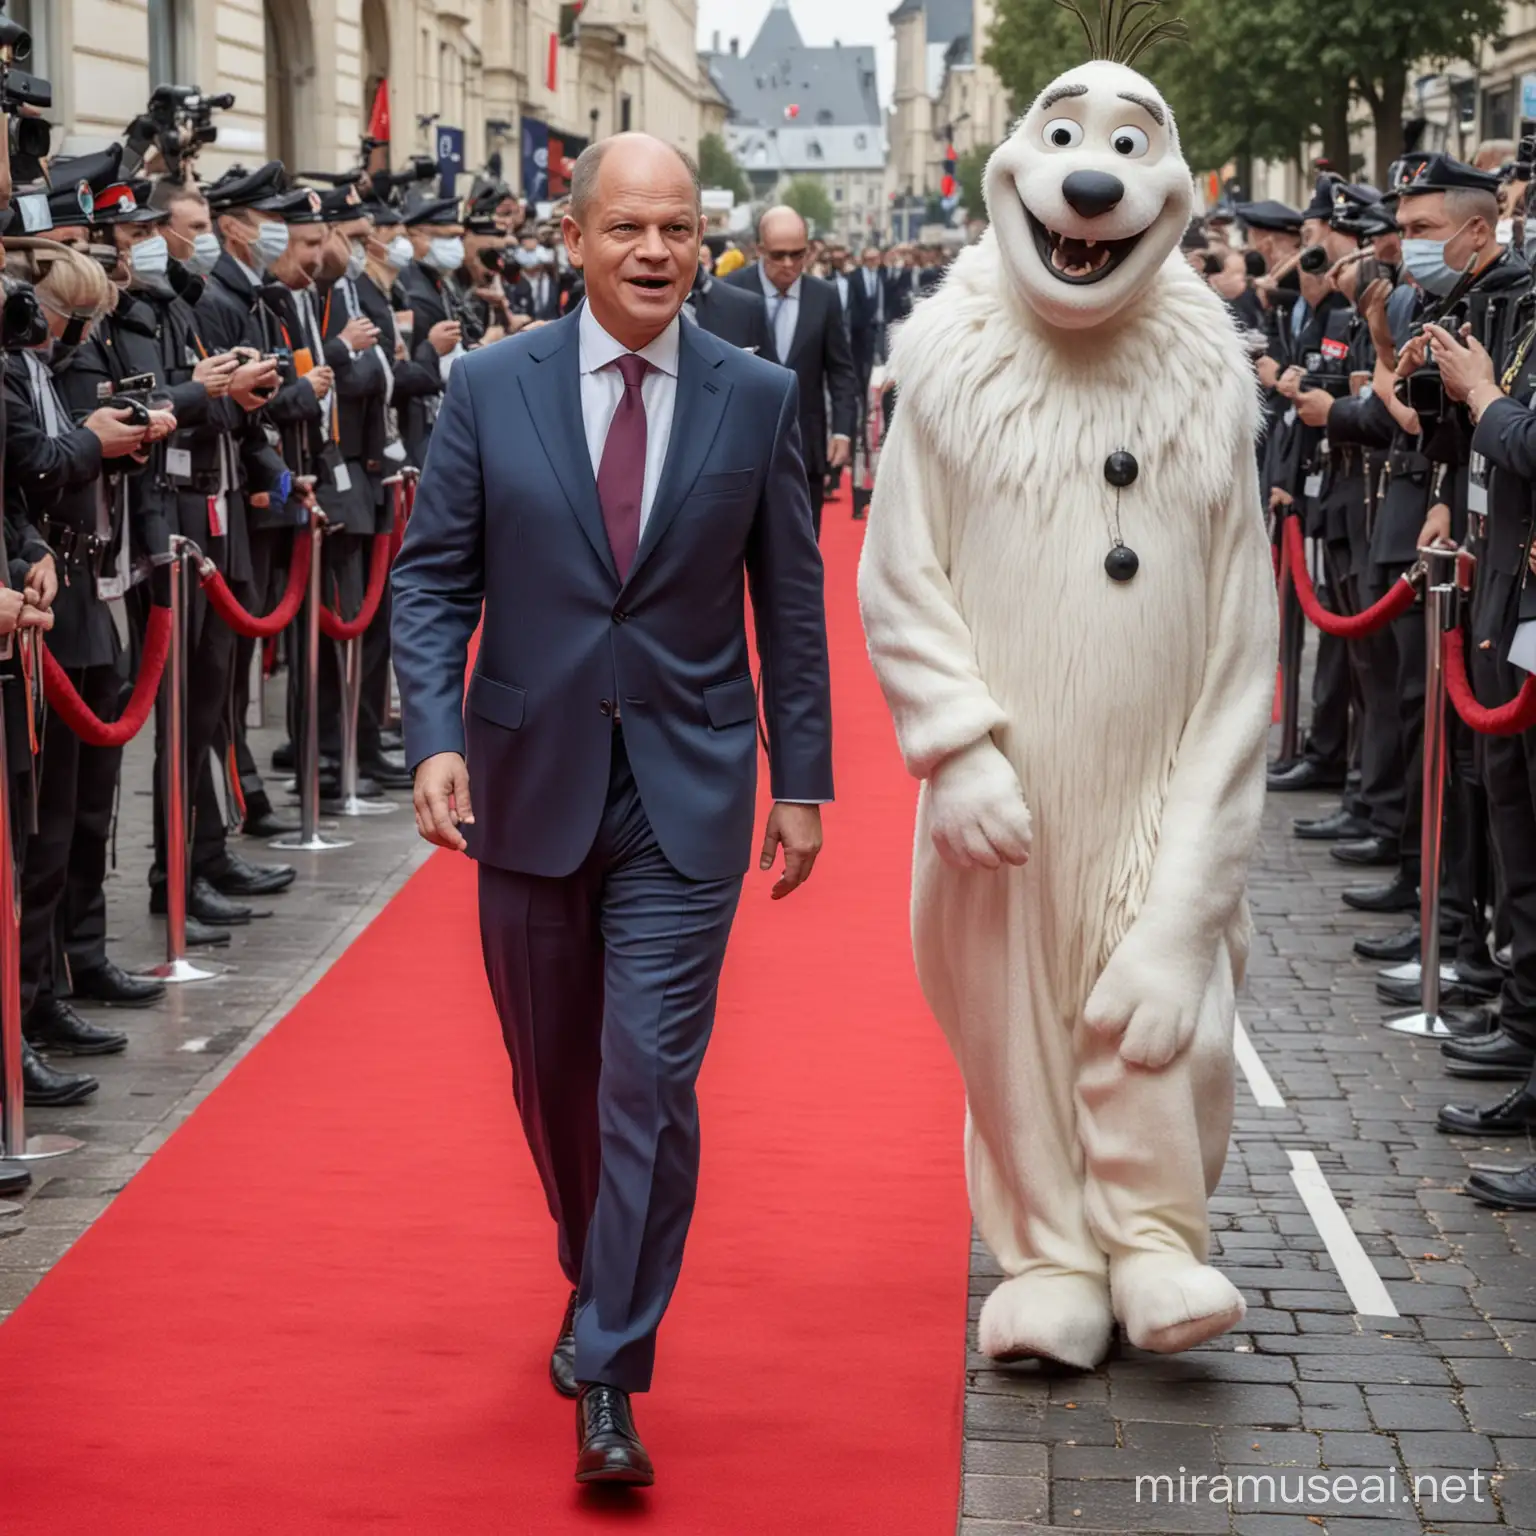 Olaf Scholz Clueless on Red Carpet Etiquette